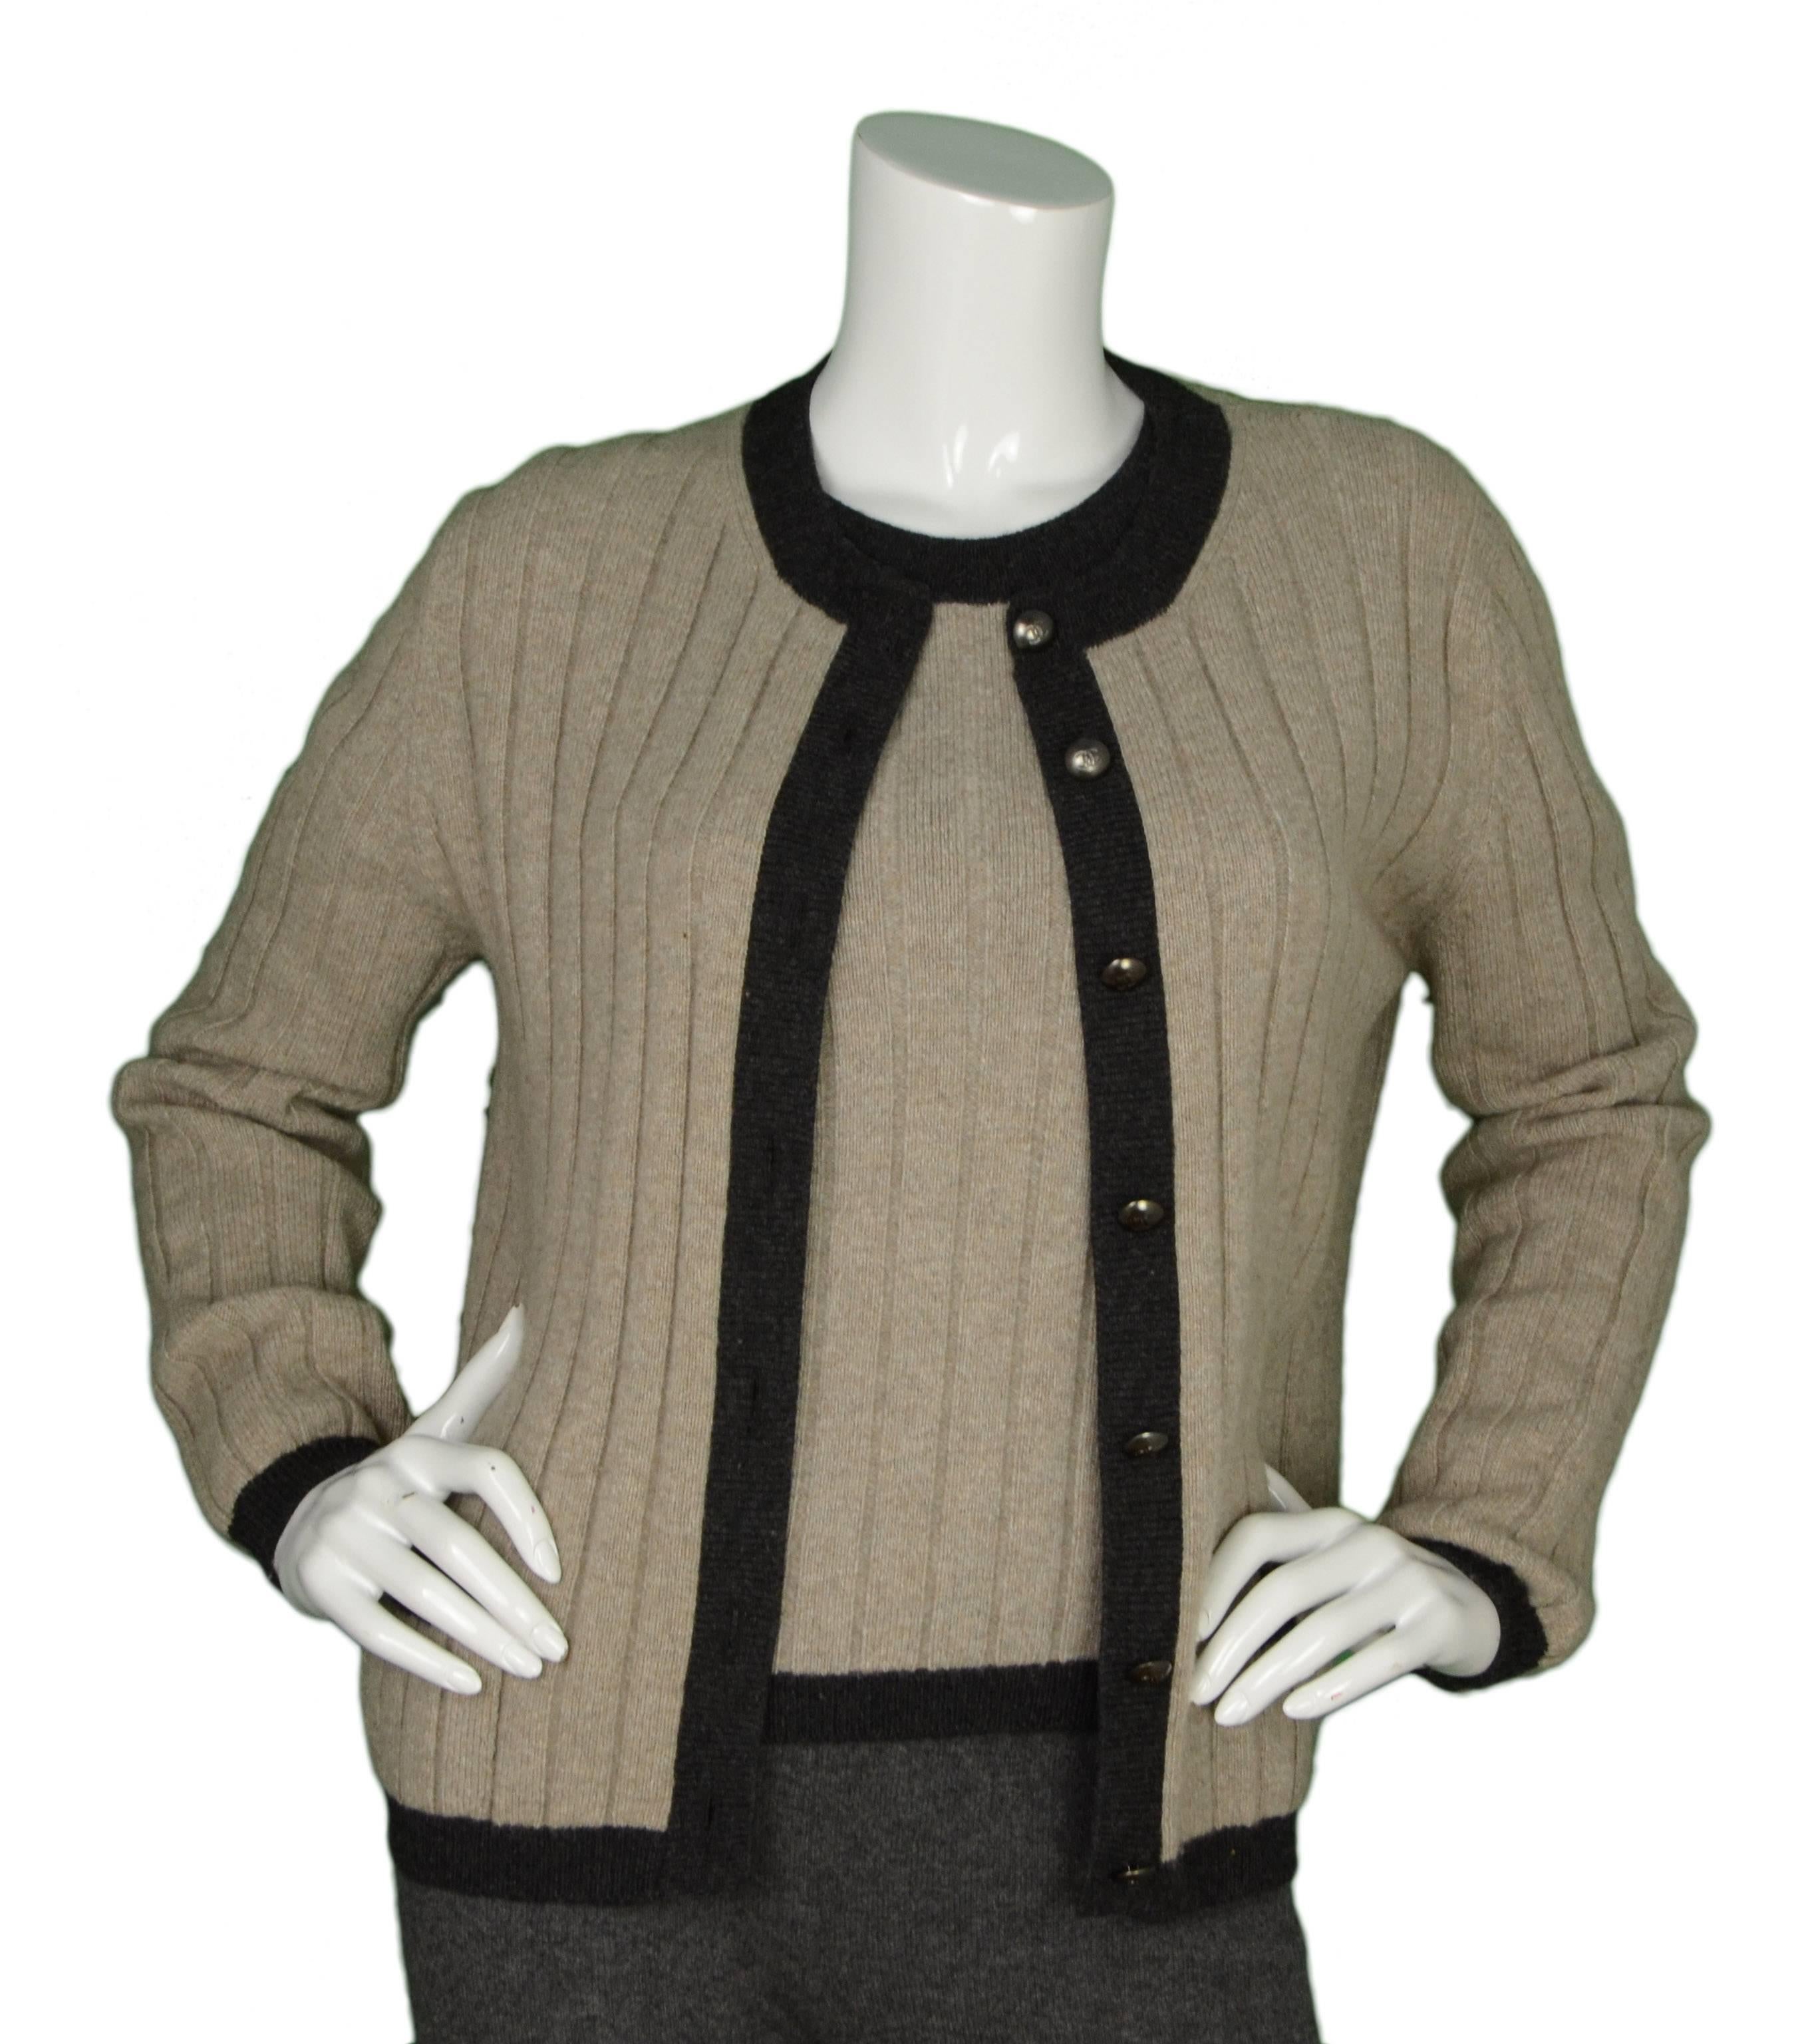 Chanel Vintage '97 Beige Cashmere Sweater Set 
Made In: France
Year of Production: 1997
Color: Beige and grey
Composition: 100% cashmere
Lining: None
Closure/Opening: Top- pull over, Cardigan- front button down closure
Exterior Pockets: Top-